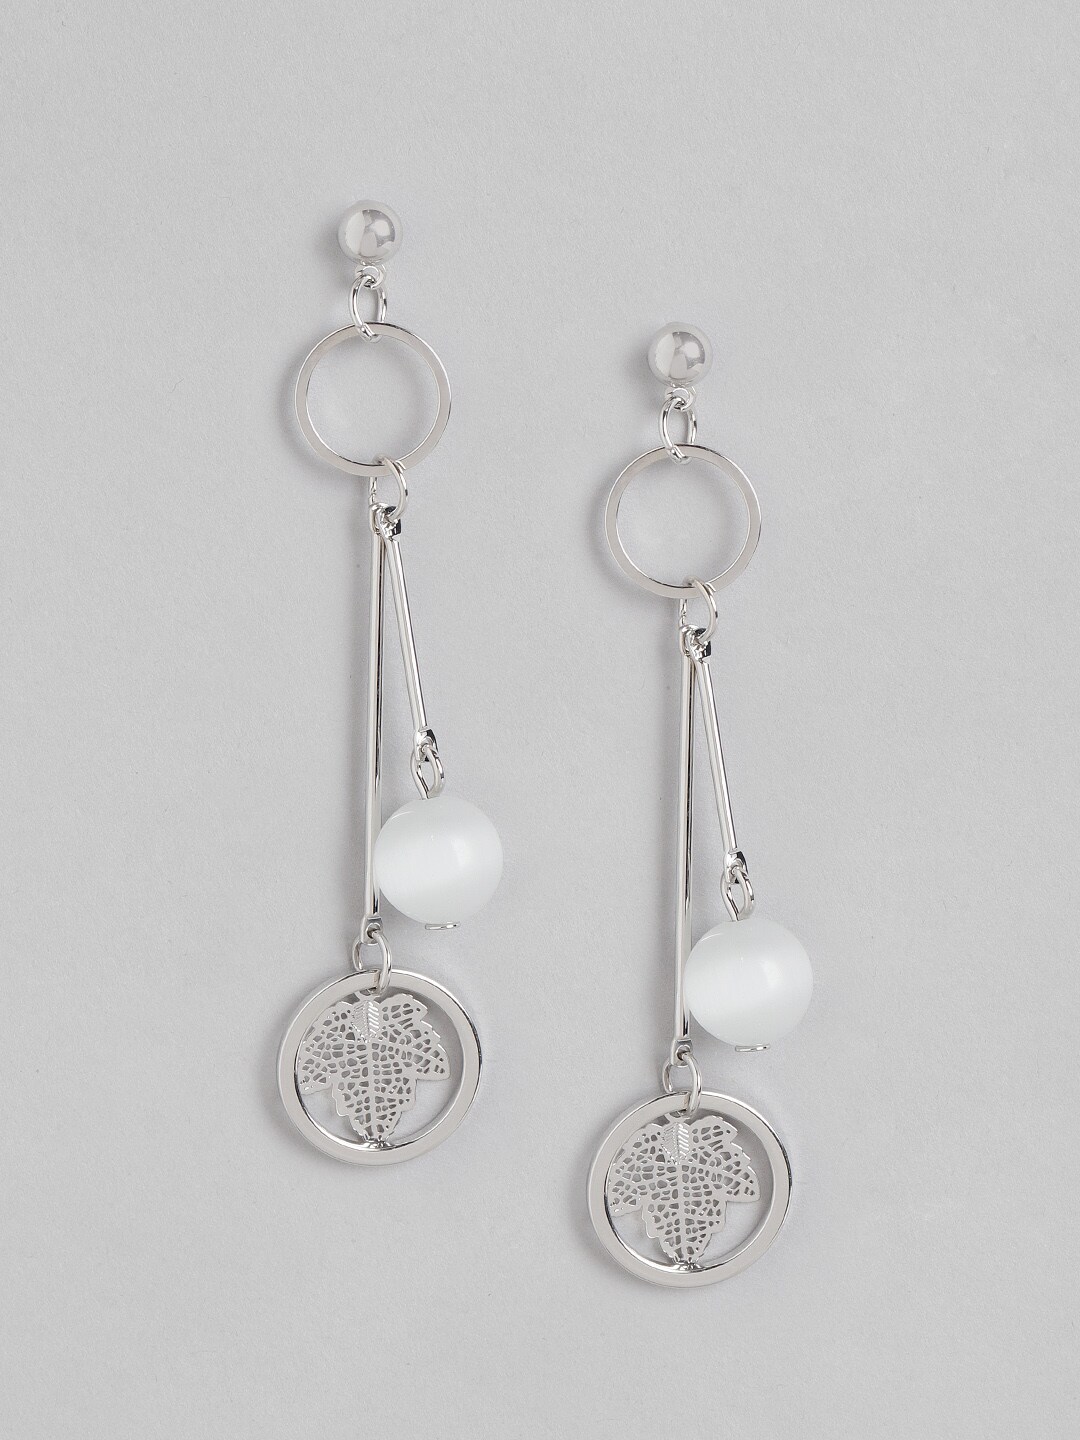 Carlton London Silver-Toned & White Rhodium-Plated Drop Earrings with Beaded Detail Price in India